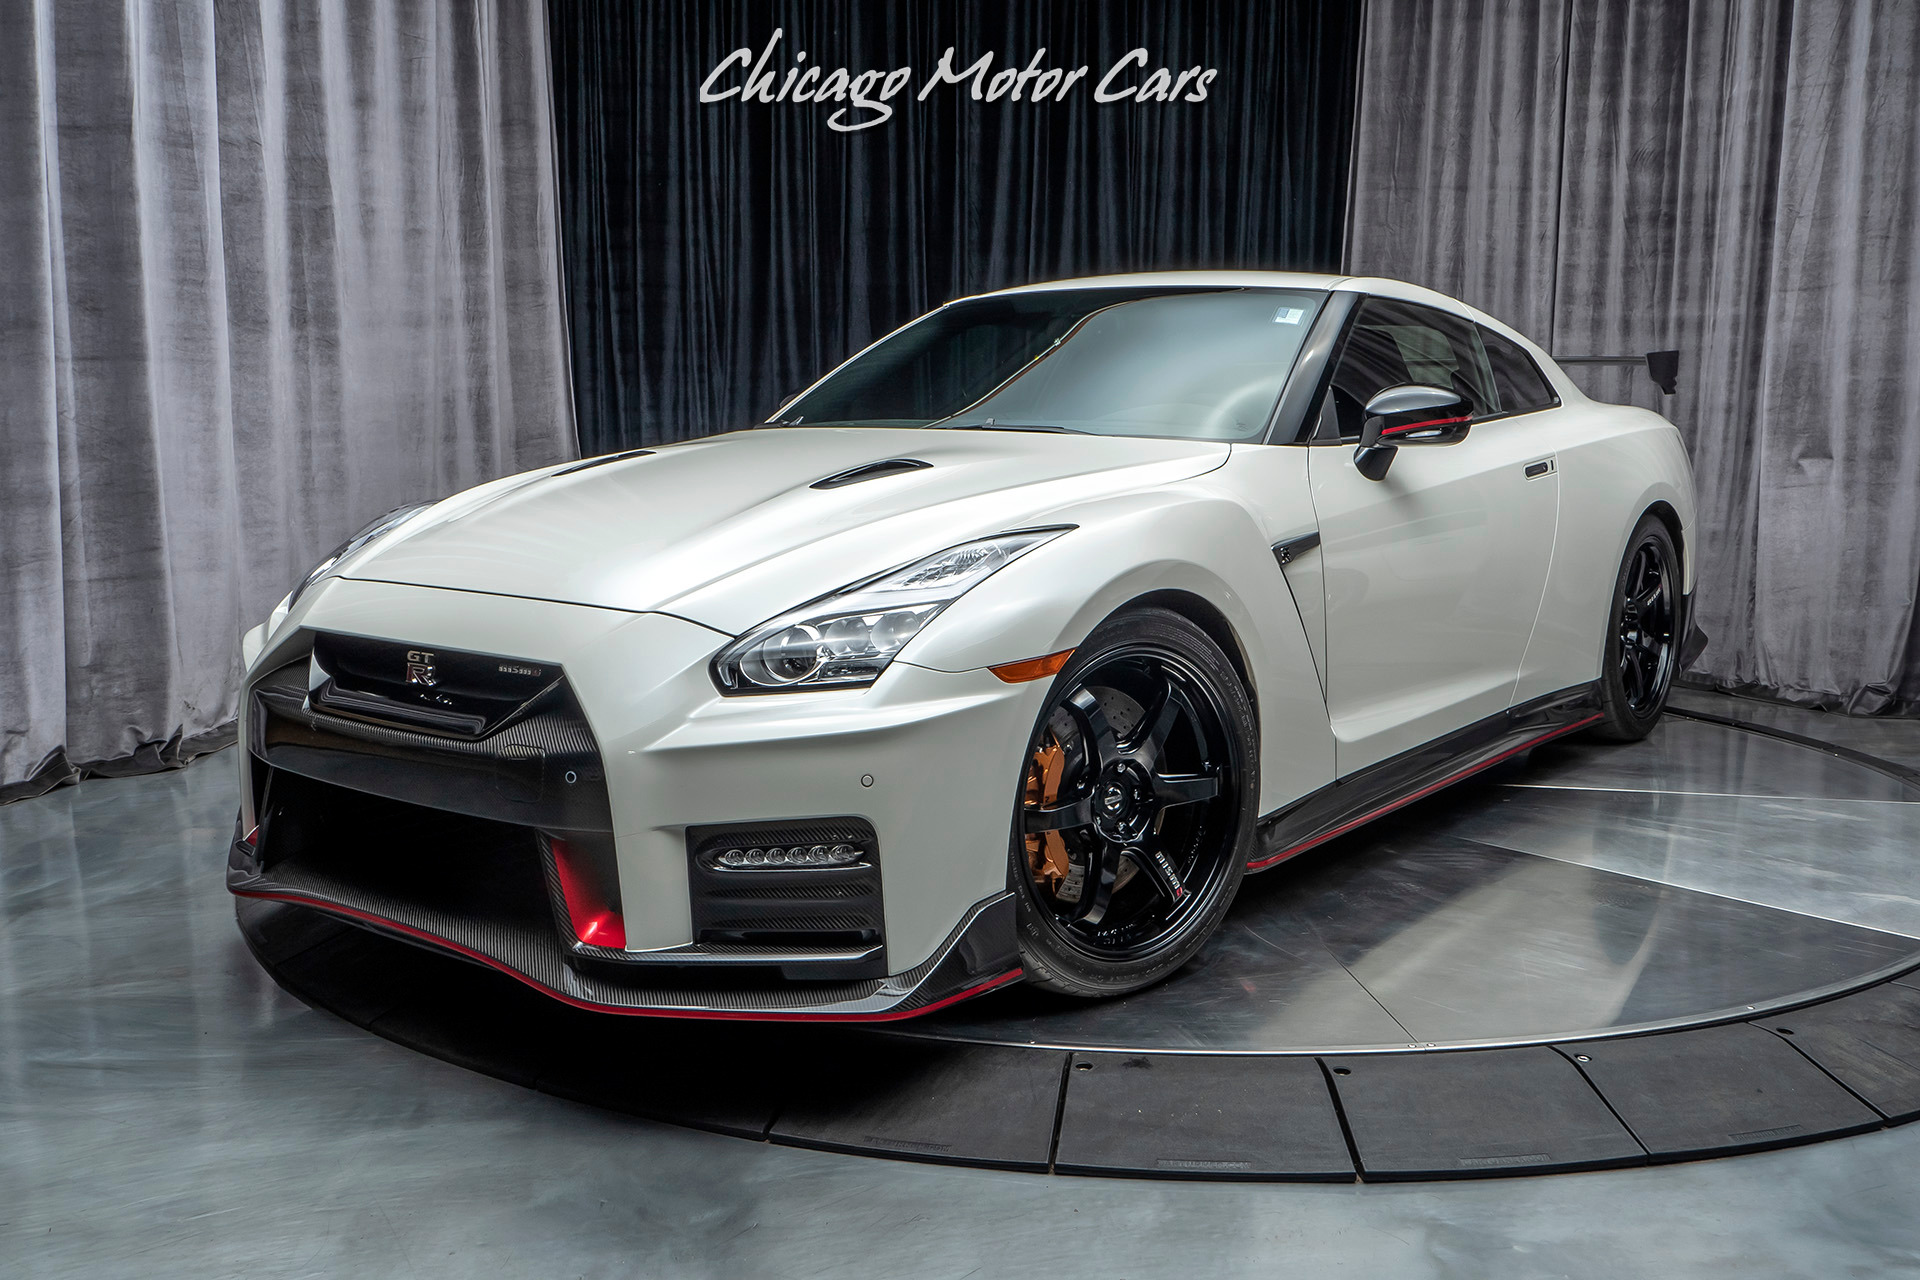 Used 17 Nissan Gt R Nismo Coupe Upgrades 800hp For Sale Special Pricing Chicago Motor Cars Stock a